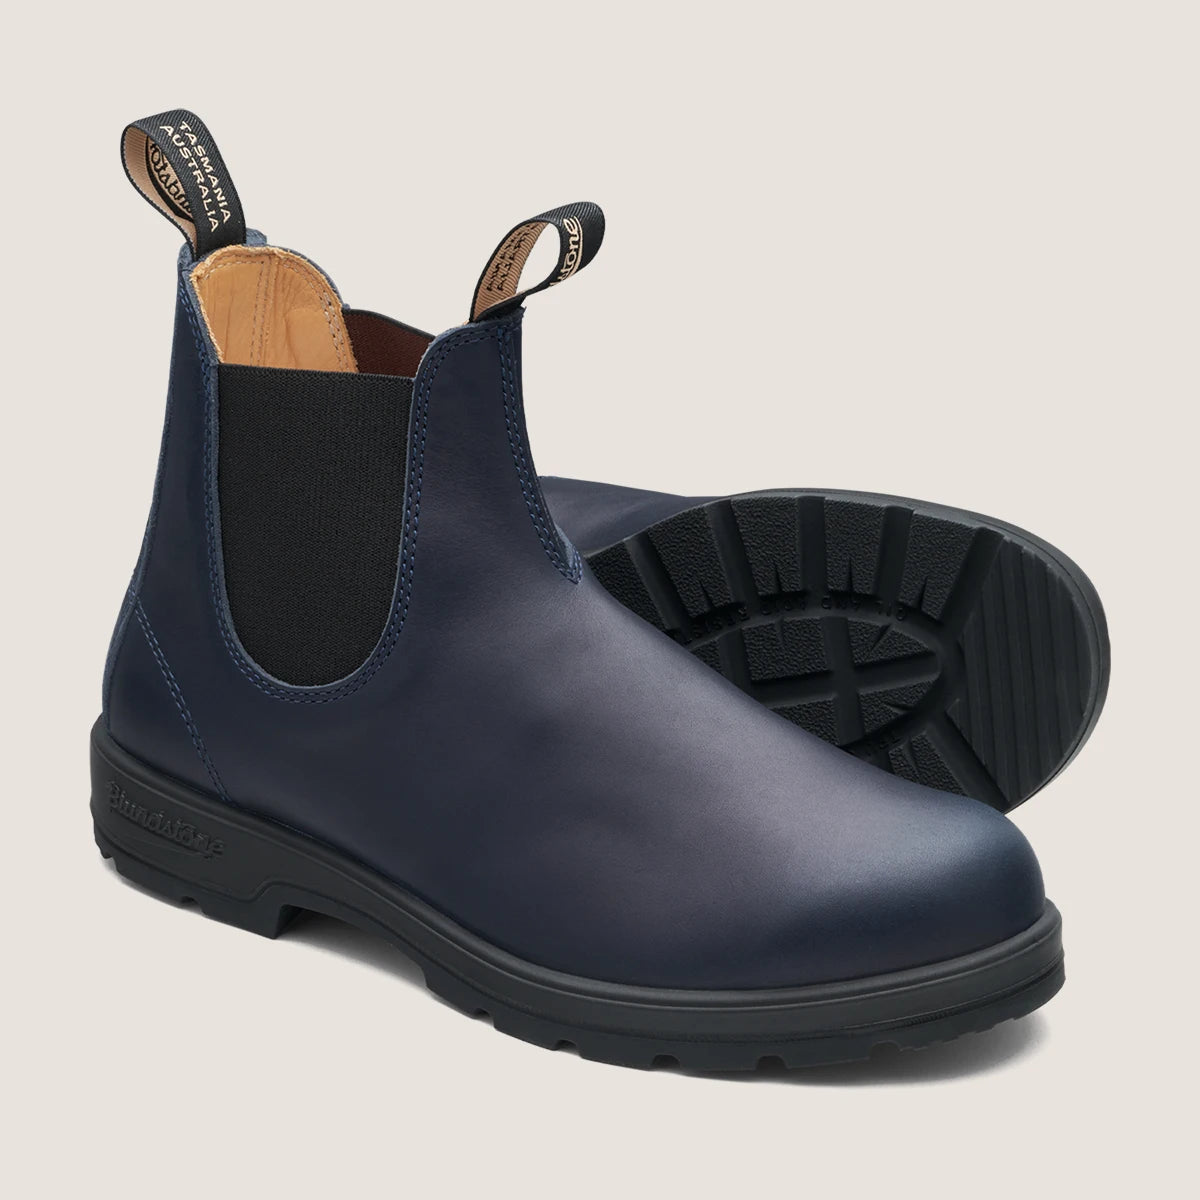 Blundstone - 2246 Chelsea Boot, Leather Lined - Navy